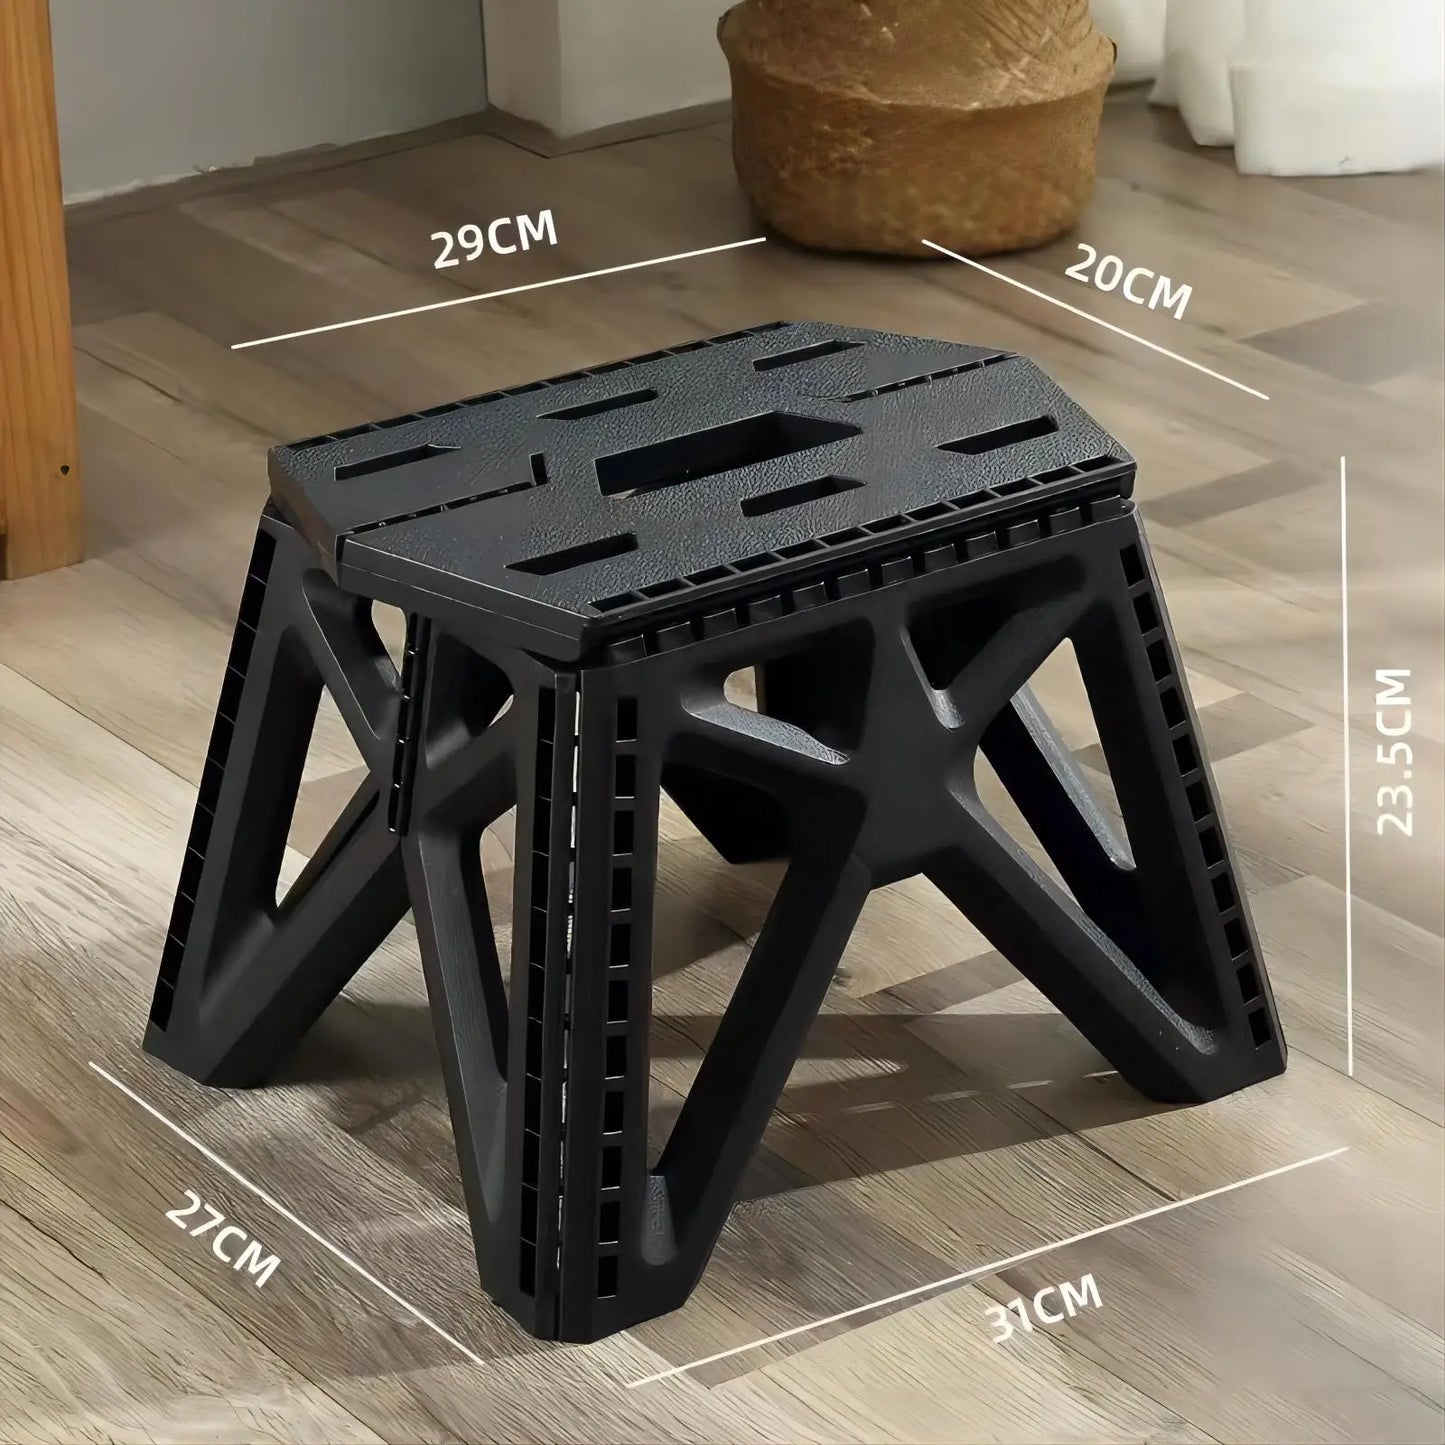 Compact Outdoor Folding Stool Ideal for Fishing, Beach, Camping